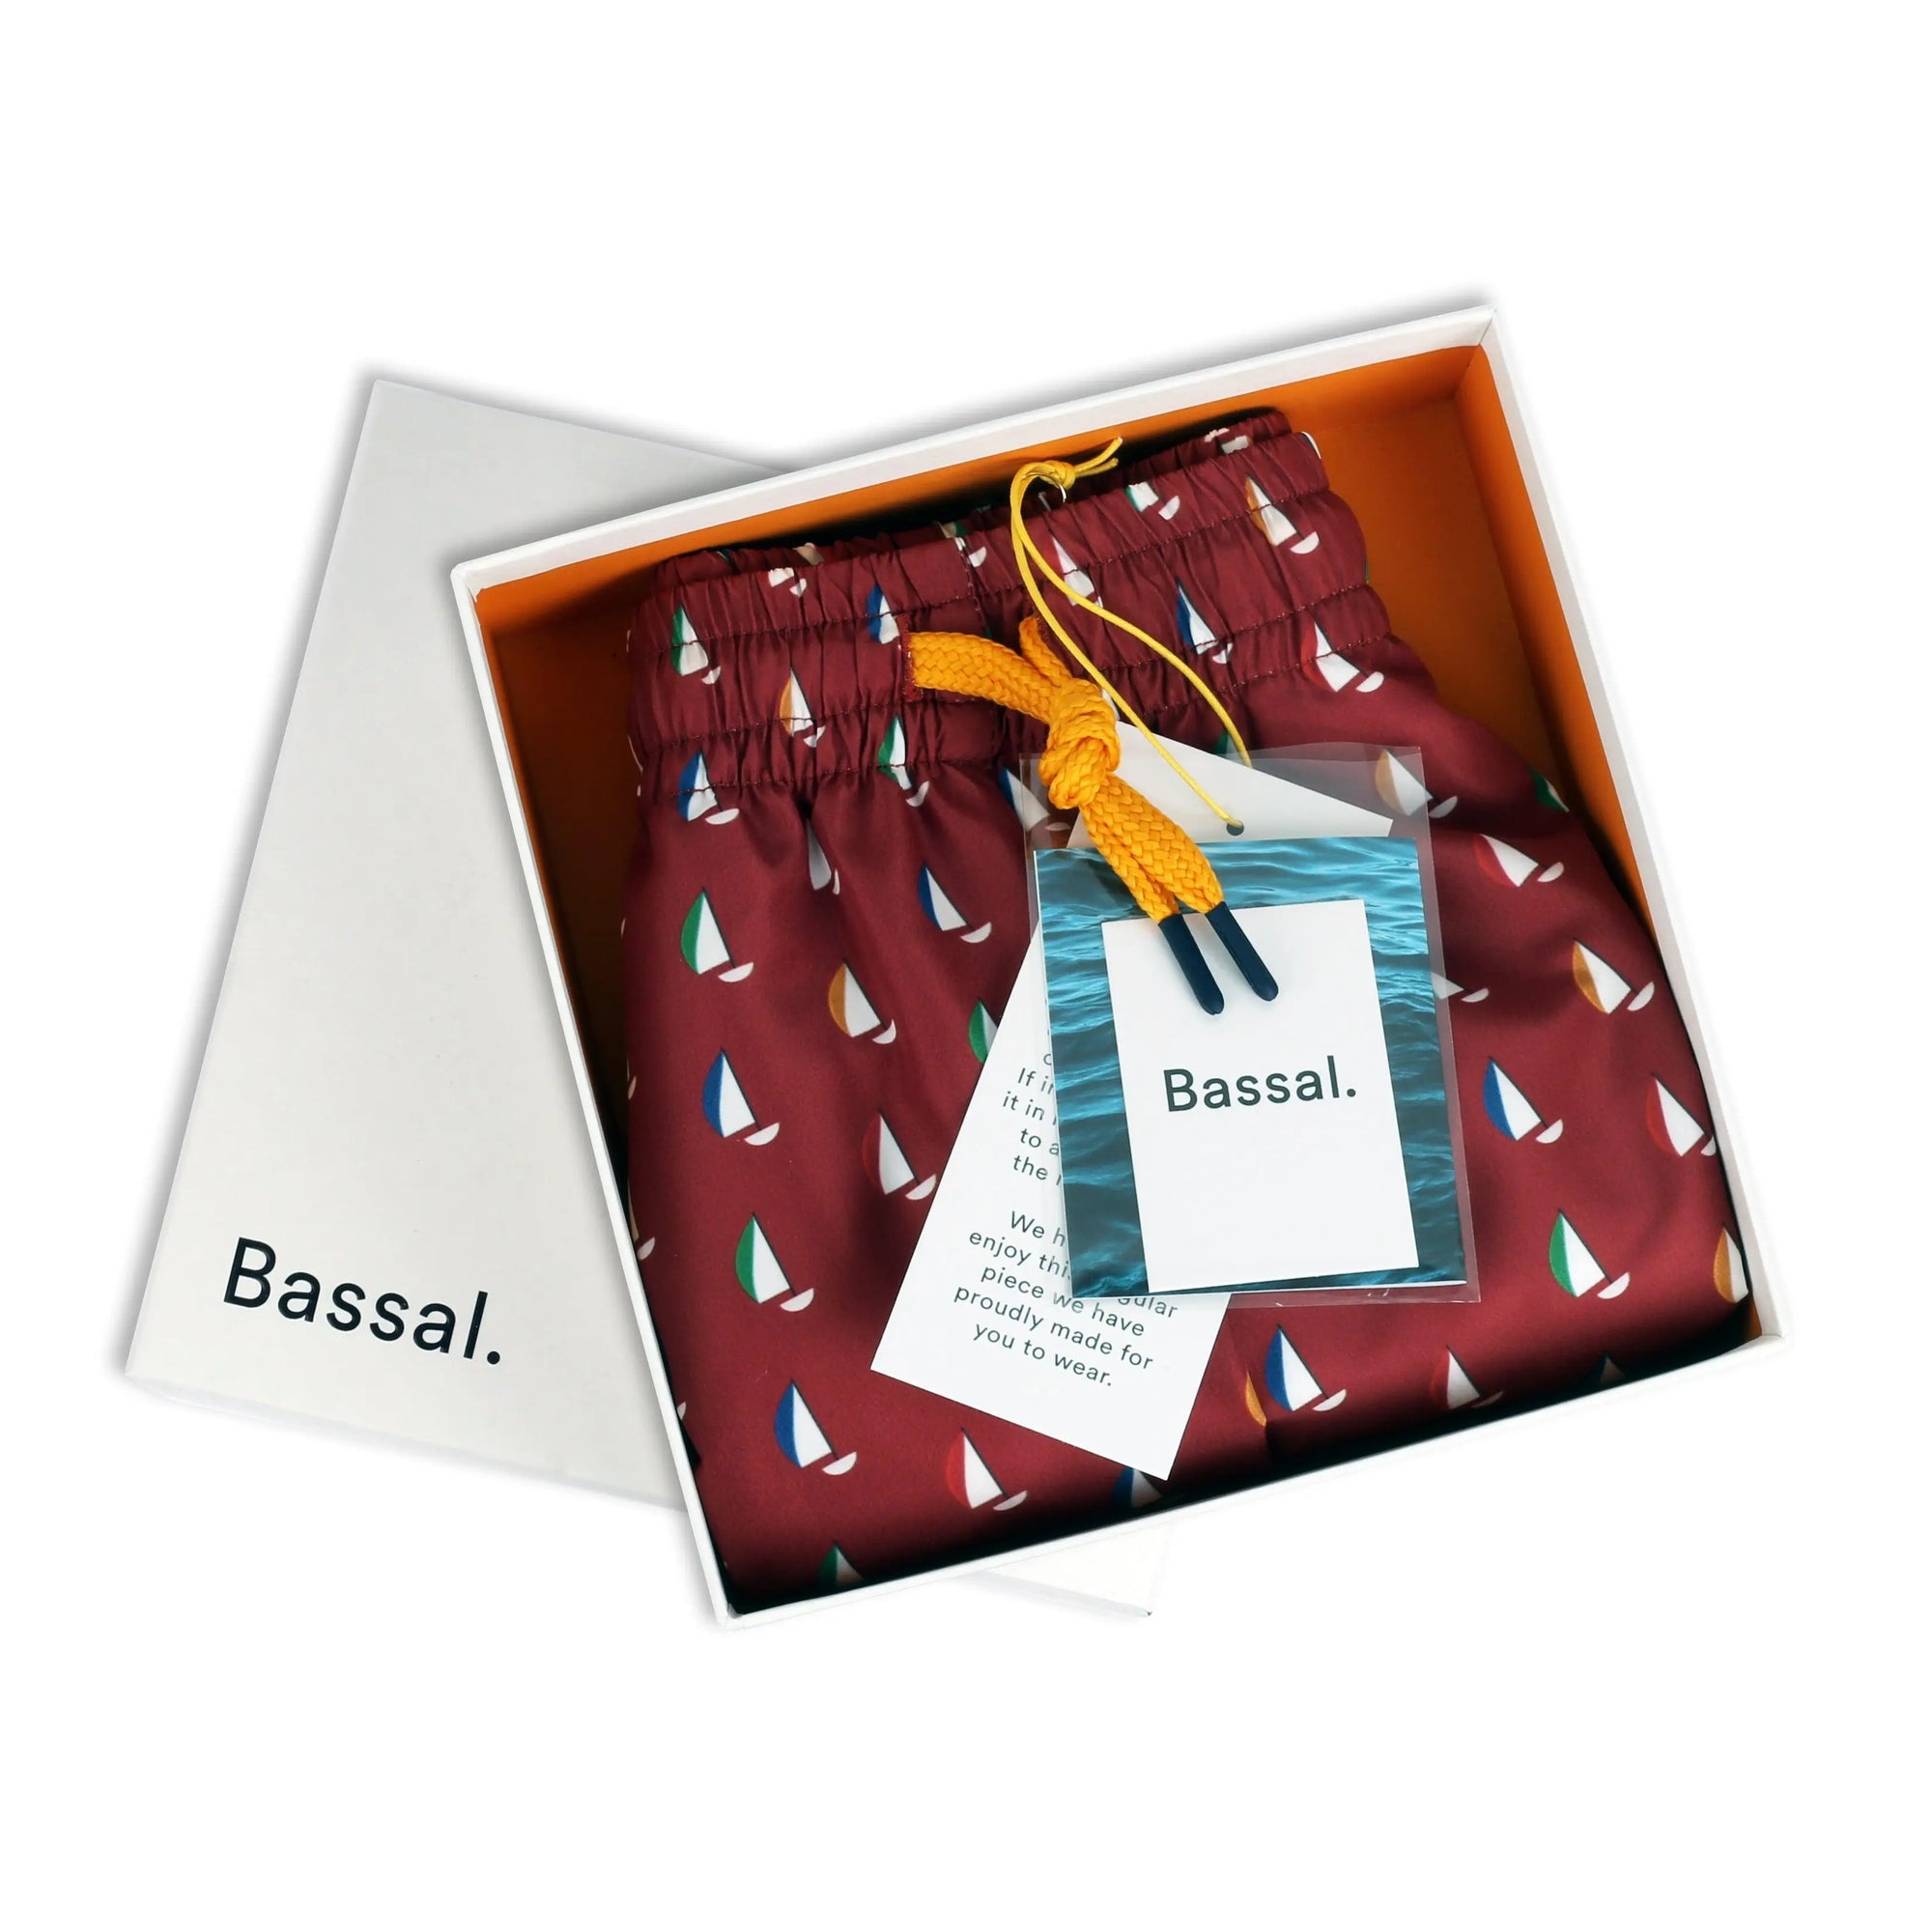 An open white box with the brand name "Bassal." on the lid from the renowned Bassalstore in Barcelona contains Regata Swimwear adorned with colorful sailboat patterns. The swimwear is neatly tied with a yellow drawstring and comes with a tag featuring the same brand name and an image of a sailboat.